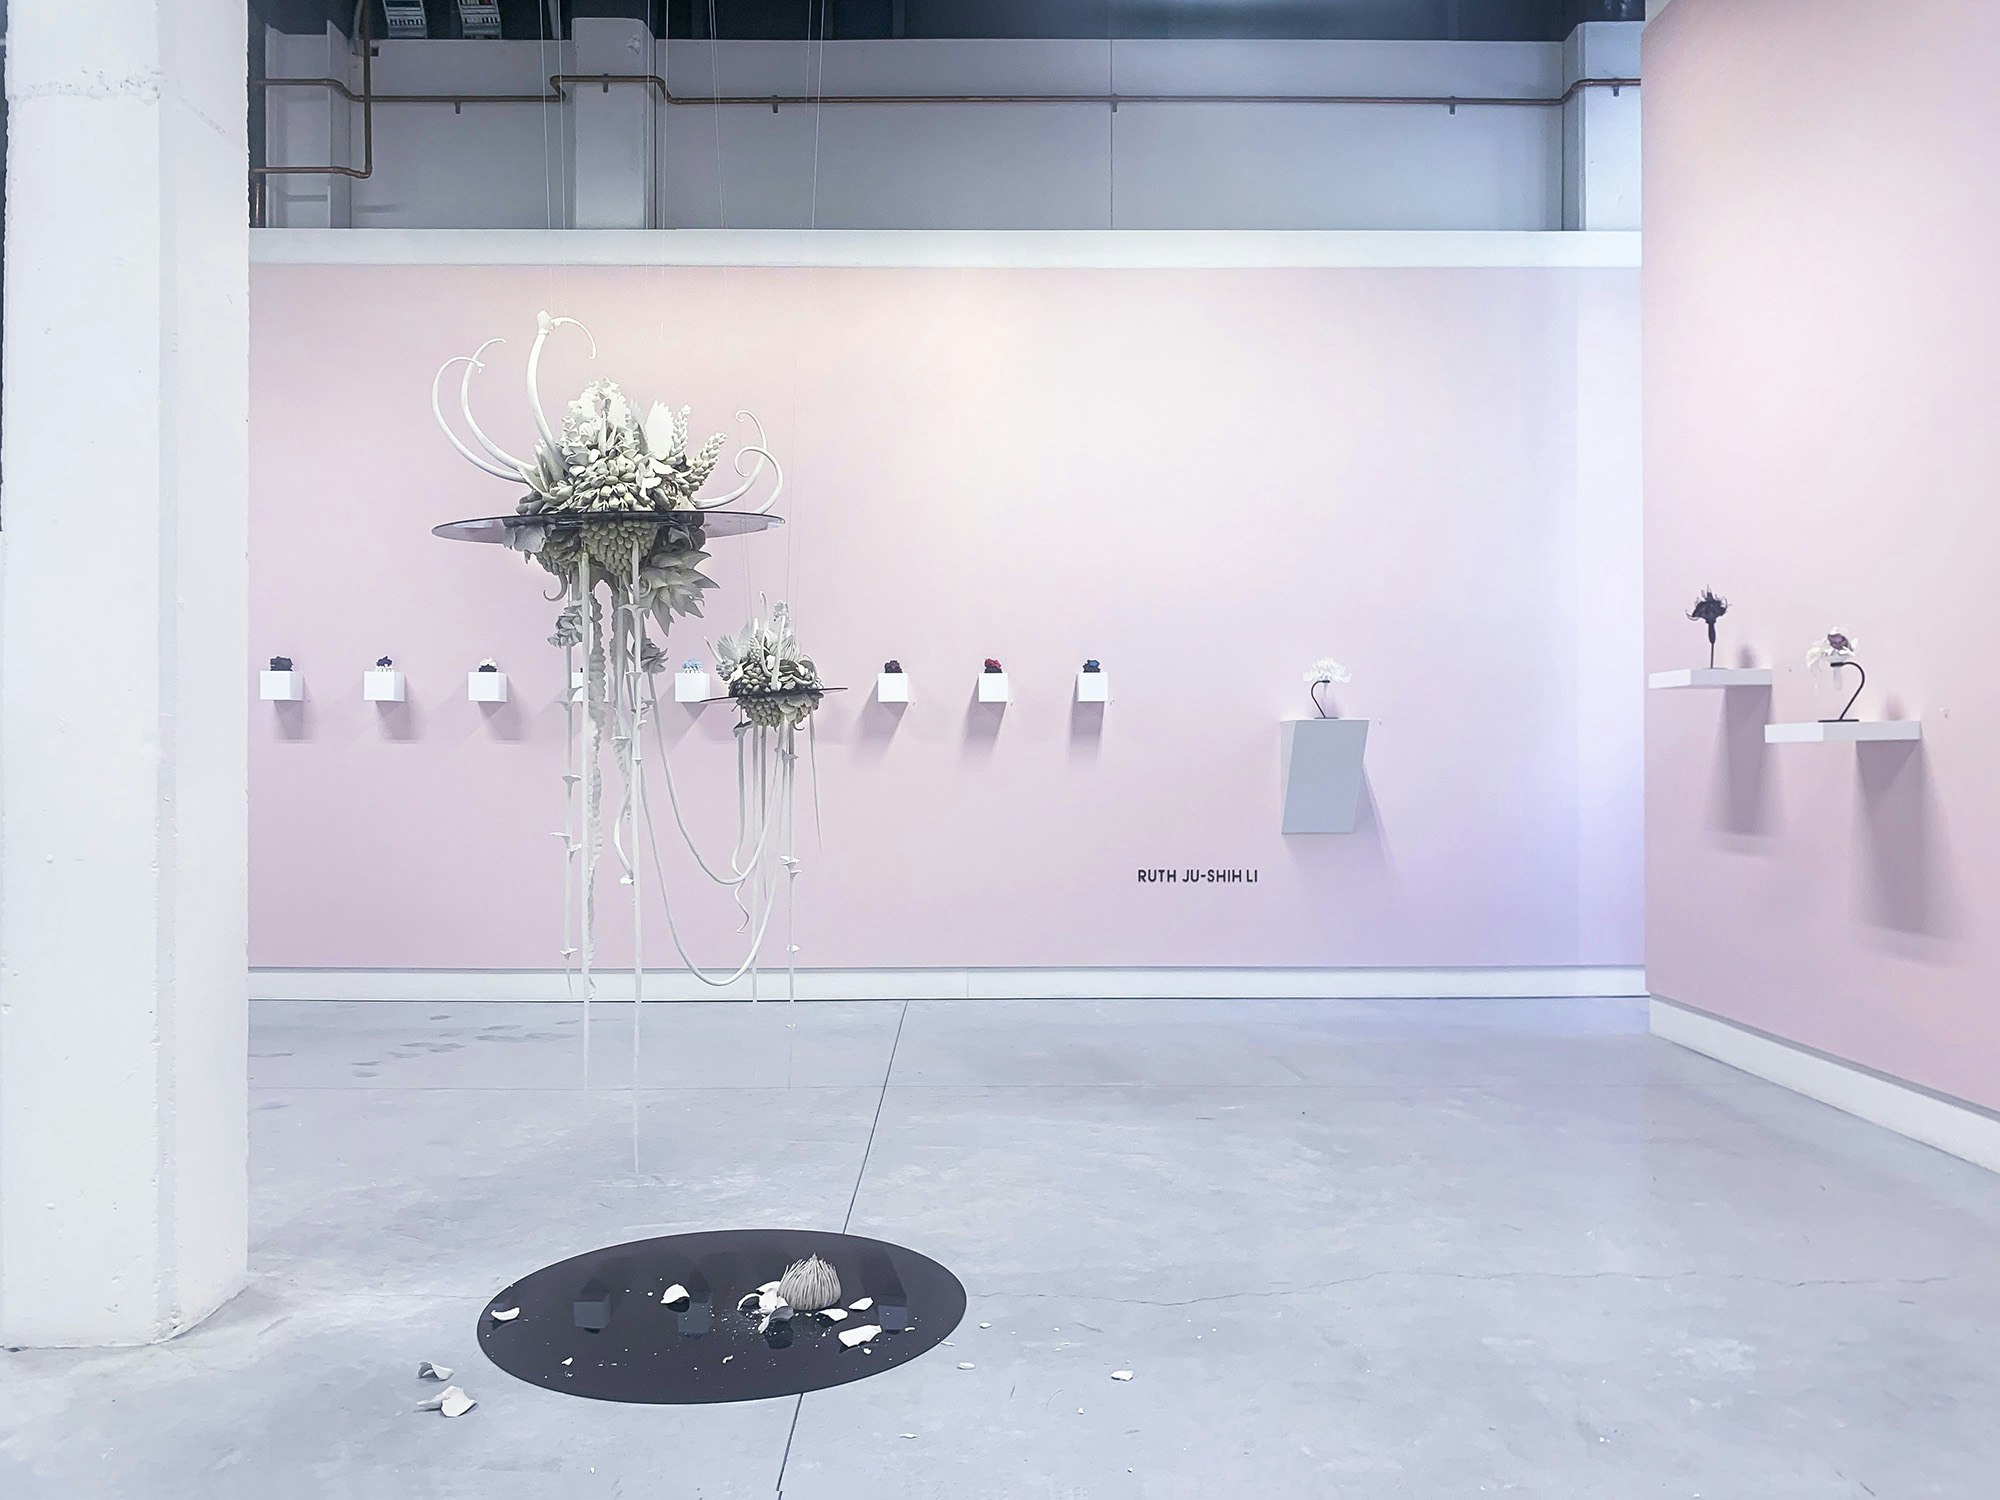 Inflorescence (installation shot), MAY SPACE, December 2020. Photo courtesy of Ruth Ju-shih Li and MAY SPACE gallery.